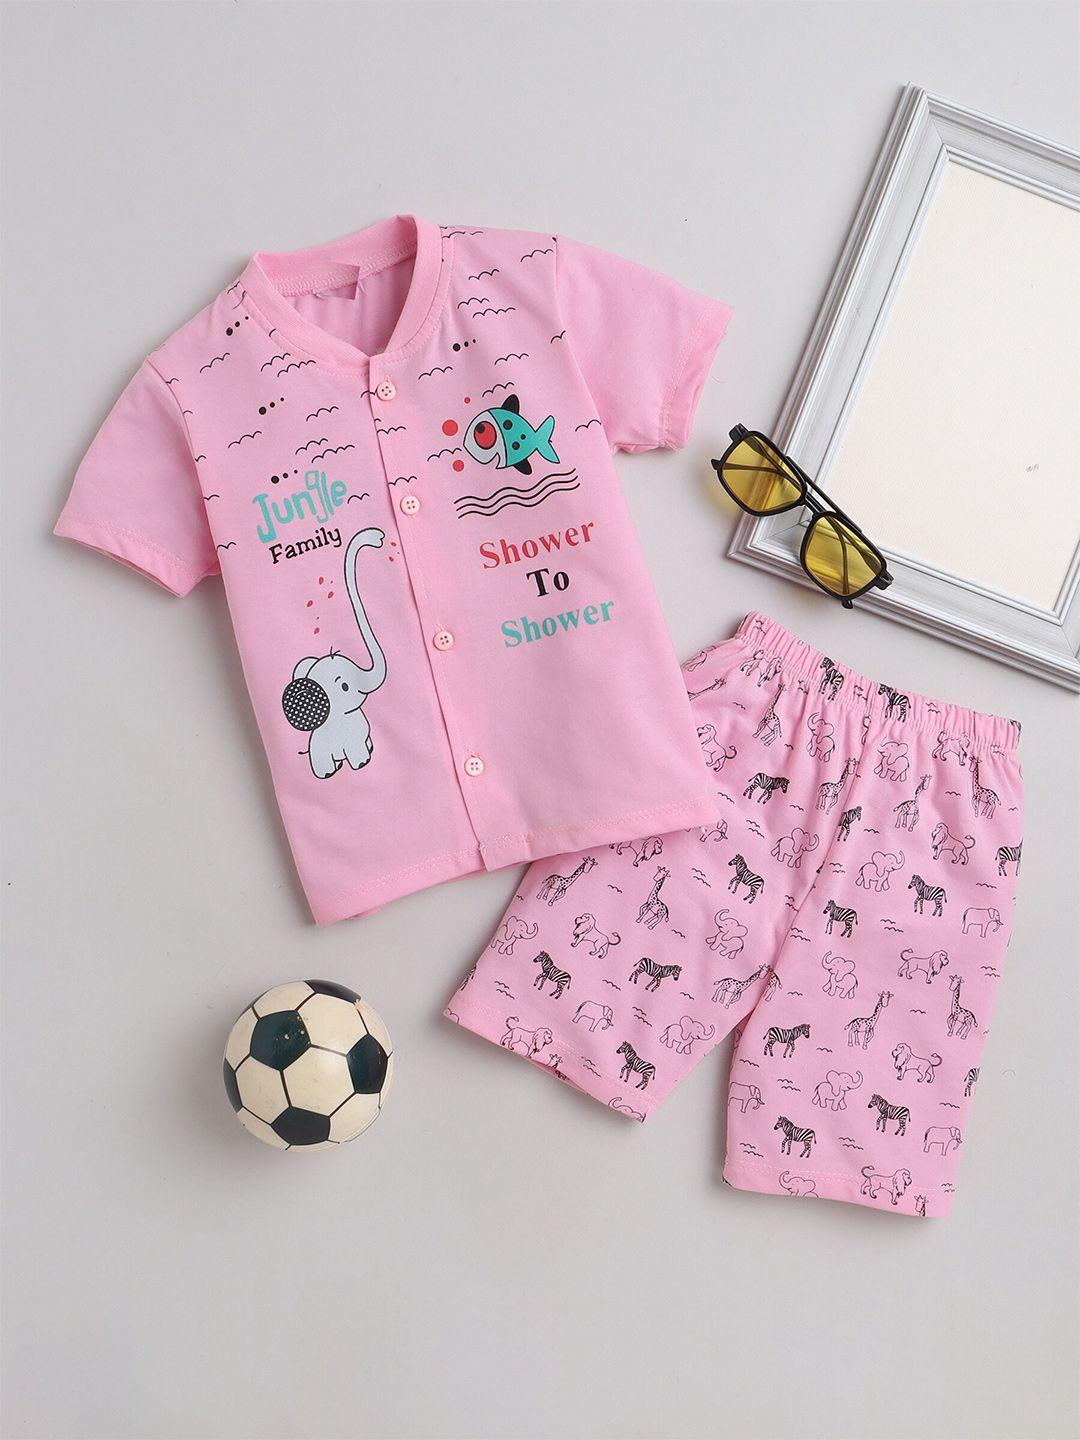 fourfolds boy conversational printed pure cotton t-shirt with shorts